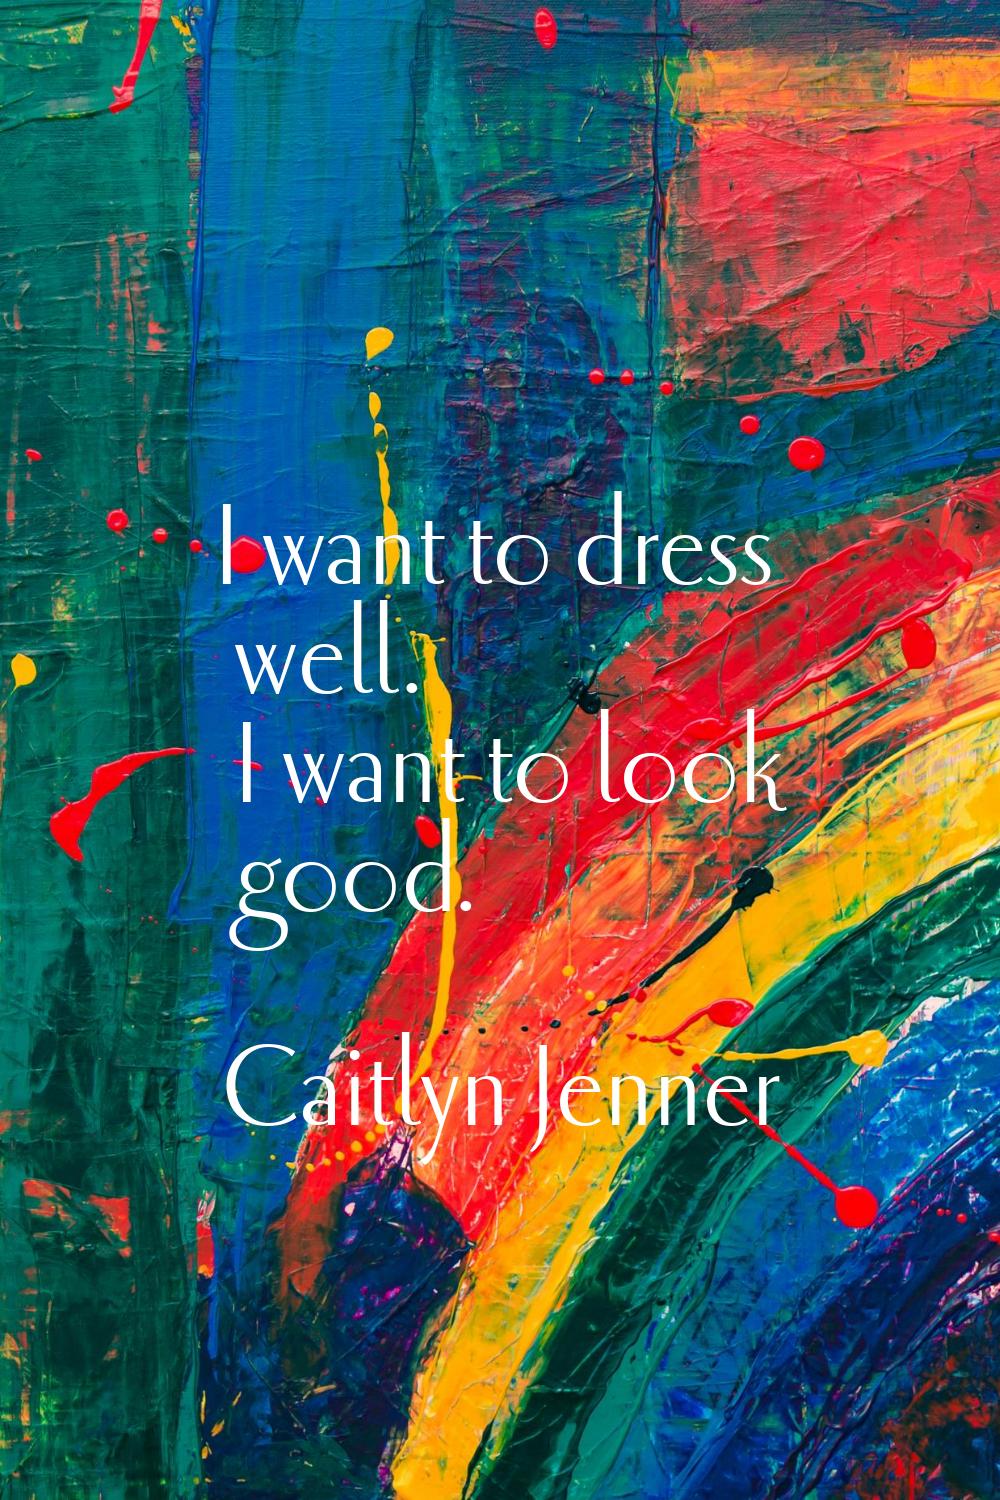 I want to dress well. I want to look good.